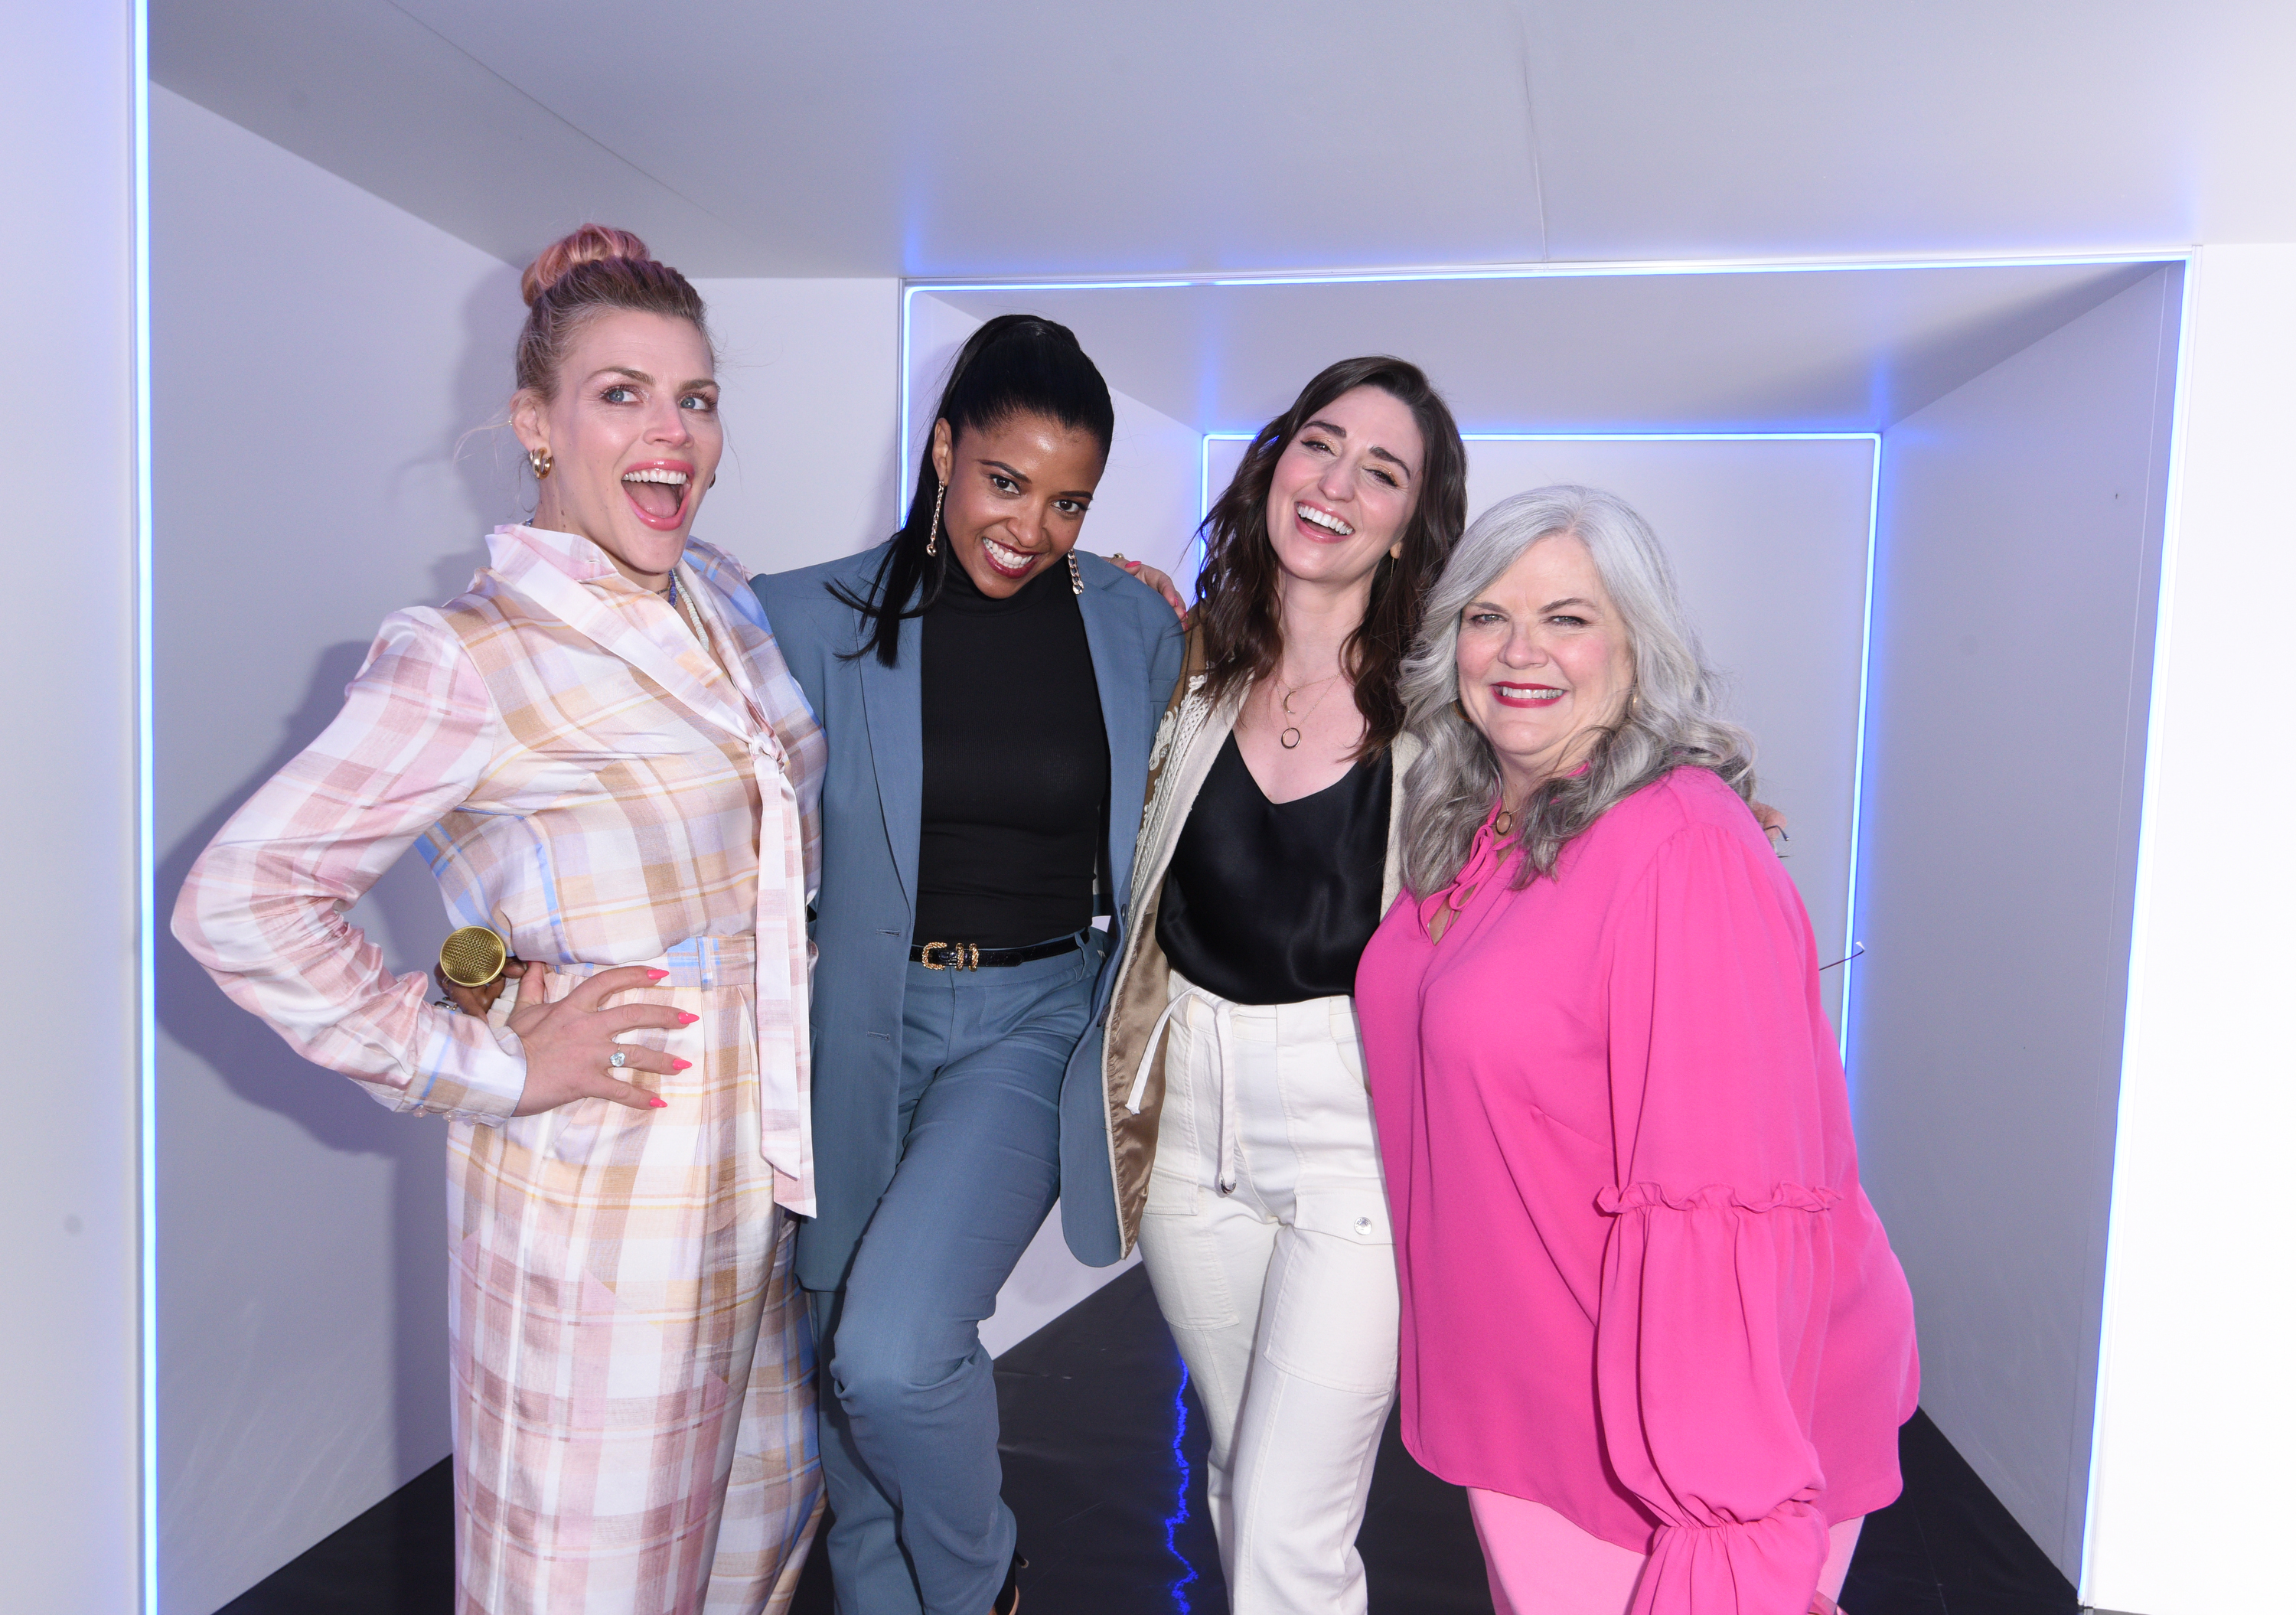 The stars of Girls5Eva, Busy Philipps, Renée Elise Goldsberry, Sara Bareilles, and Paula Pell, at SXSW. (NBCU Photo Bank via Getty Images—TM and © 2022 Peacock TV LLC. All Rights Reserved.)